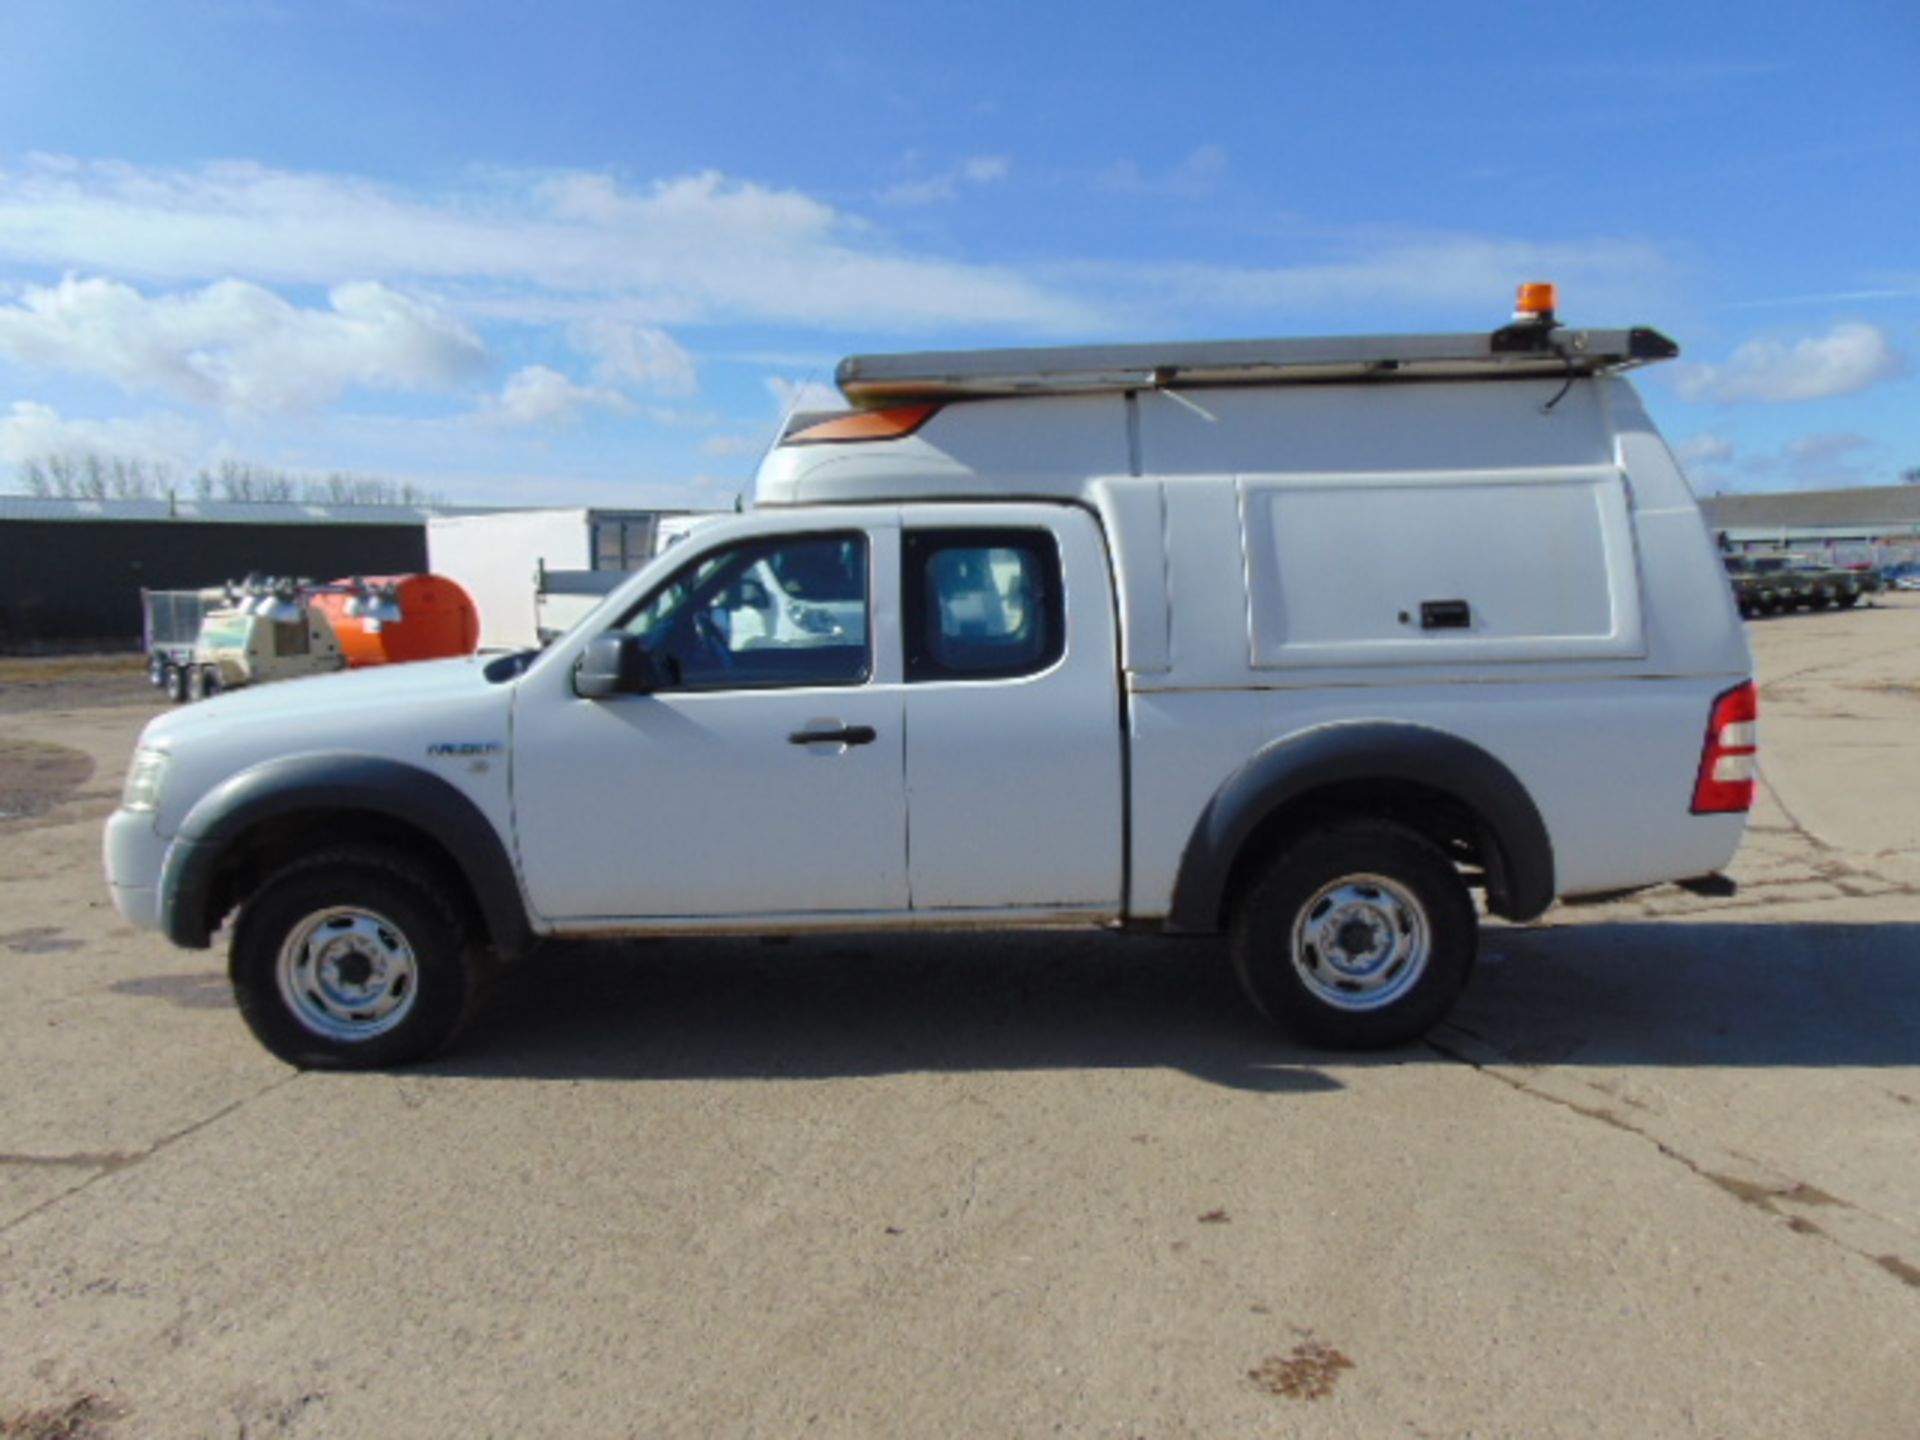 2008 Ford Ranger Super Cab 2.5TDCi 4x4 Pick Up C/W Toolbox Back and Winch - Image 4 of 21